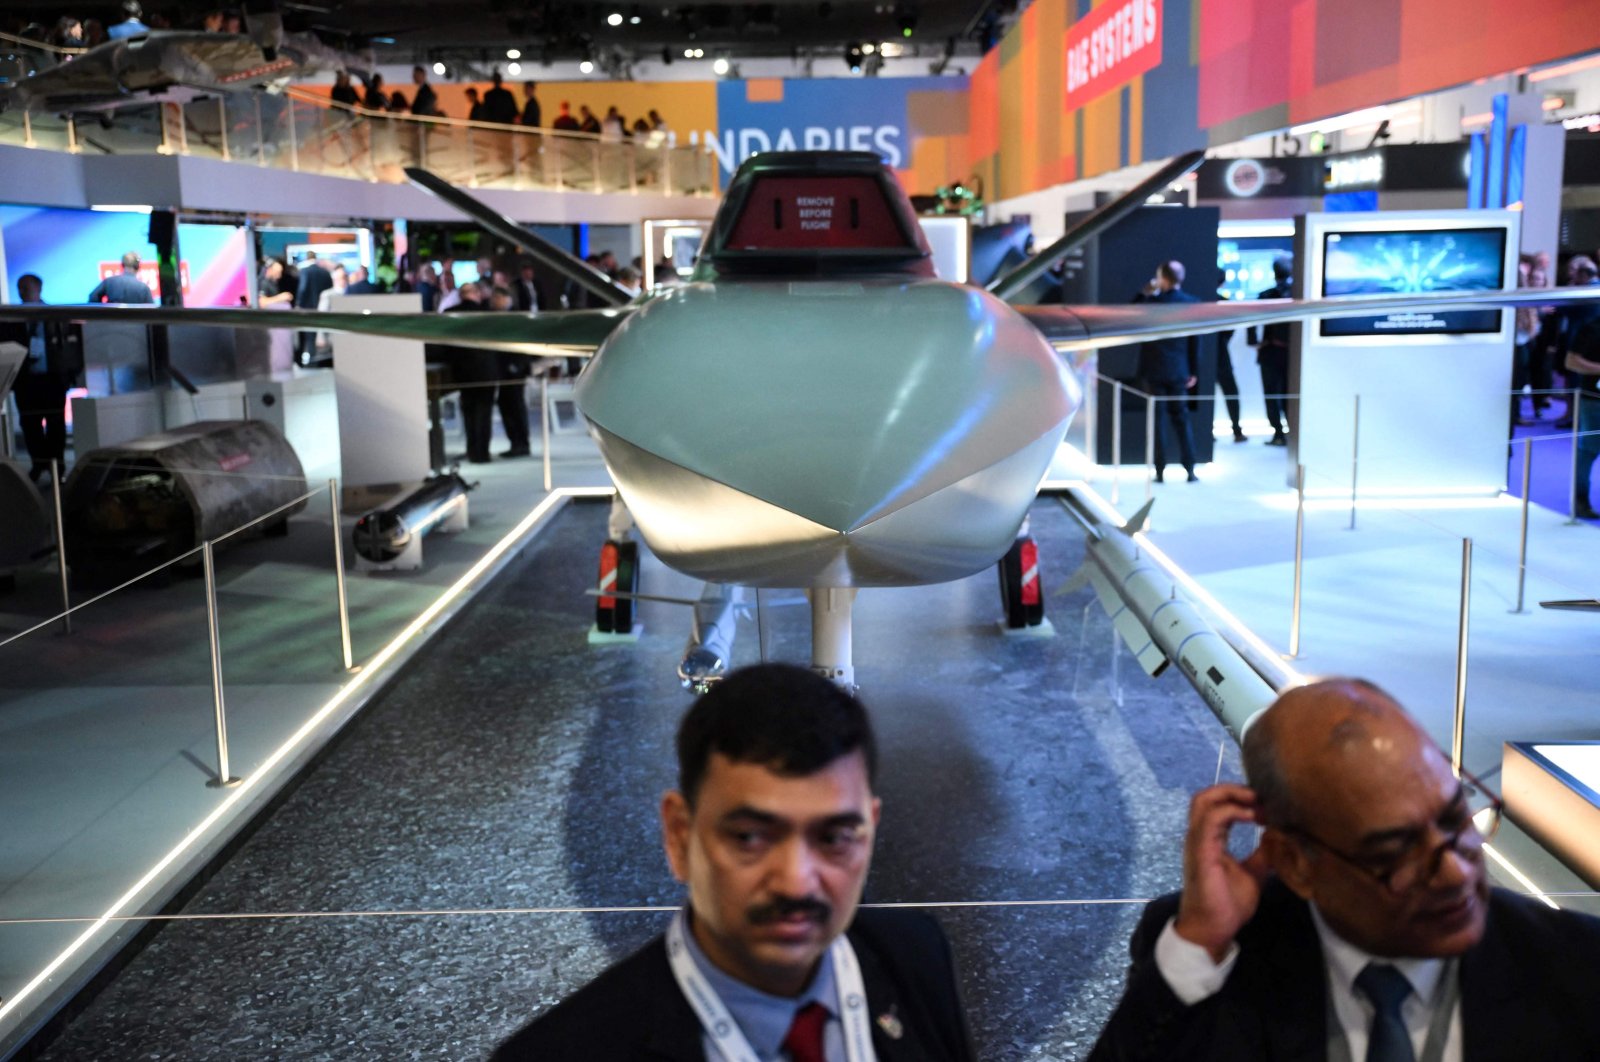 Visitors stand by an intelligent aircraft by Bae Systems during the Defence and Security Equipment International (DSEI) fair at the ExCeL center, London, U.K., Sept. 12, 2023. (AFP Photo)